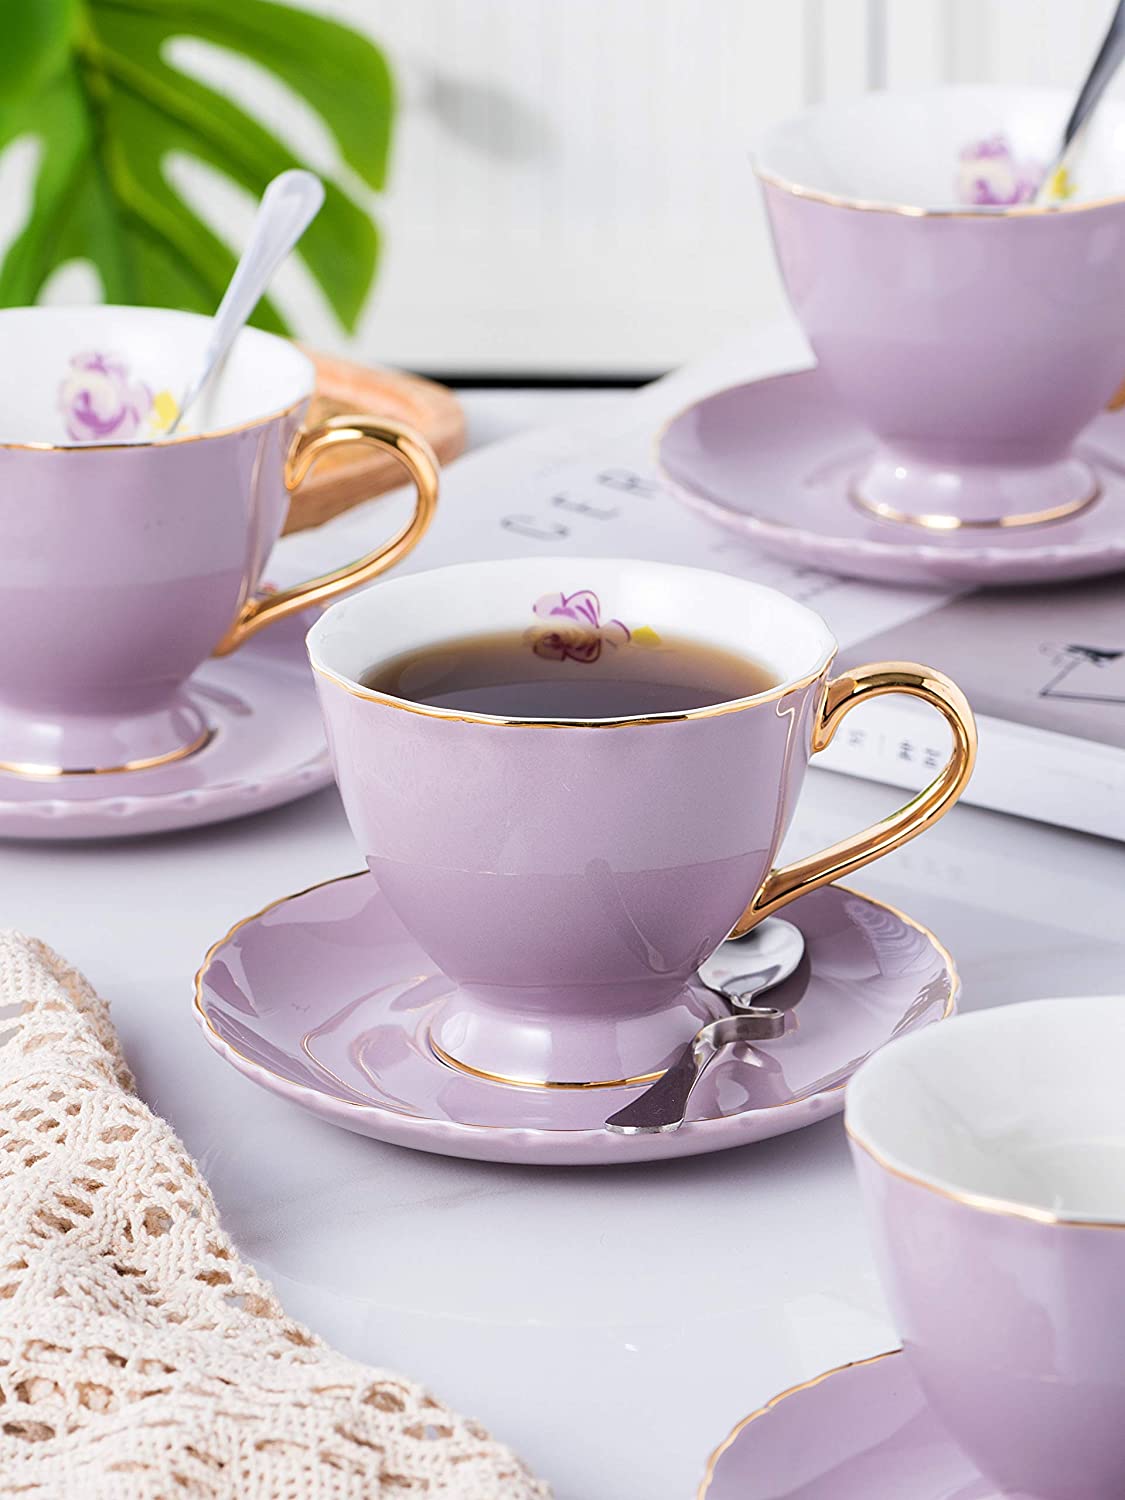 Jusalpha® Porcelain Tea Cup and Saucer Coffee Cup Set with Saucer and Spoon  Set of 6 (FD-TCS02 purple (6), 7oz)